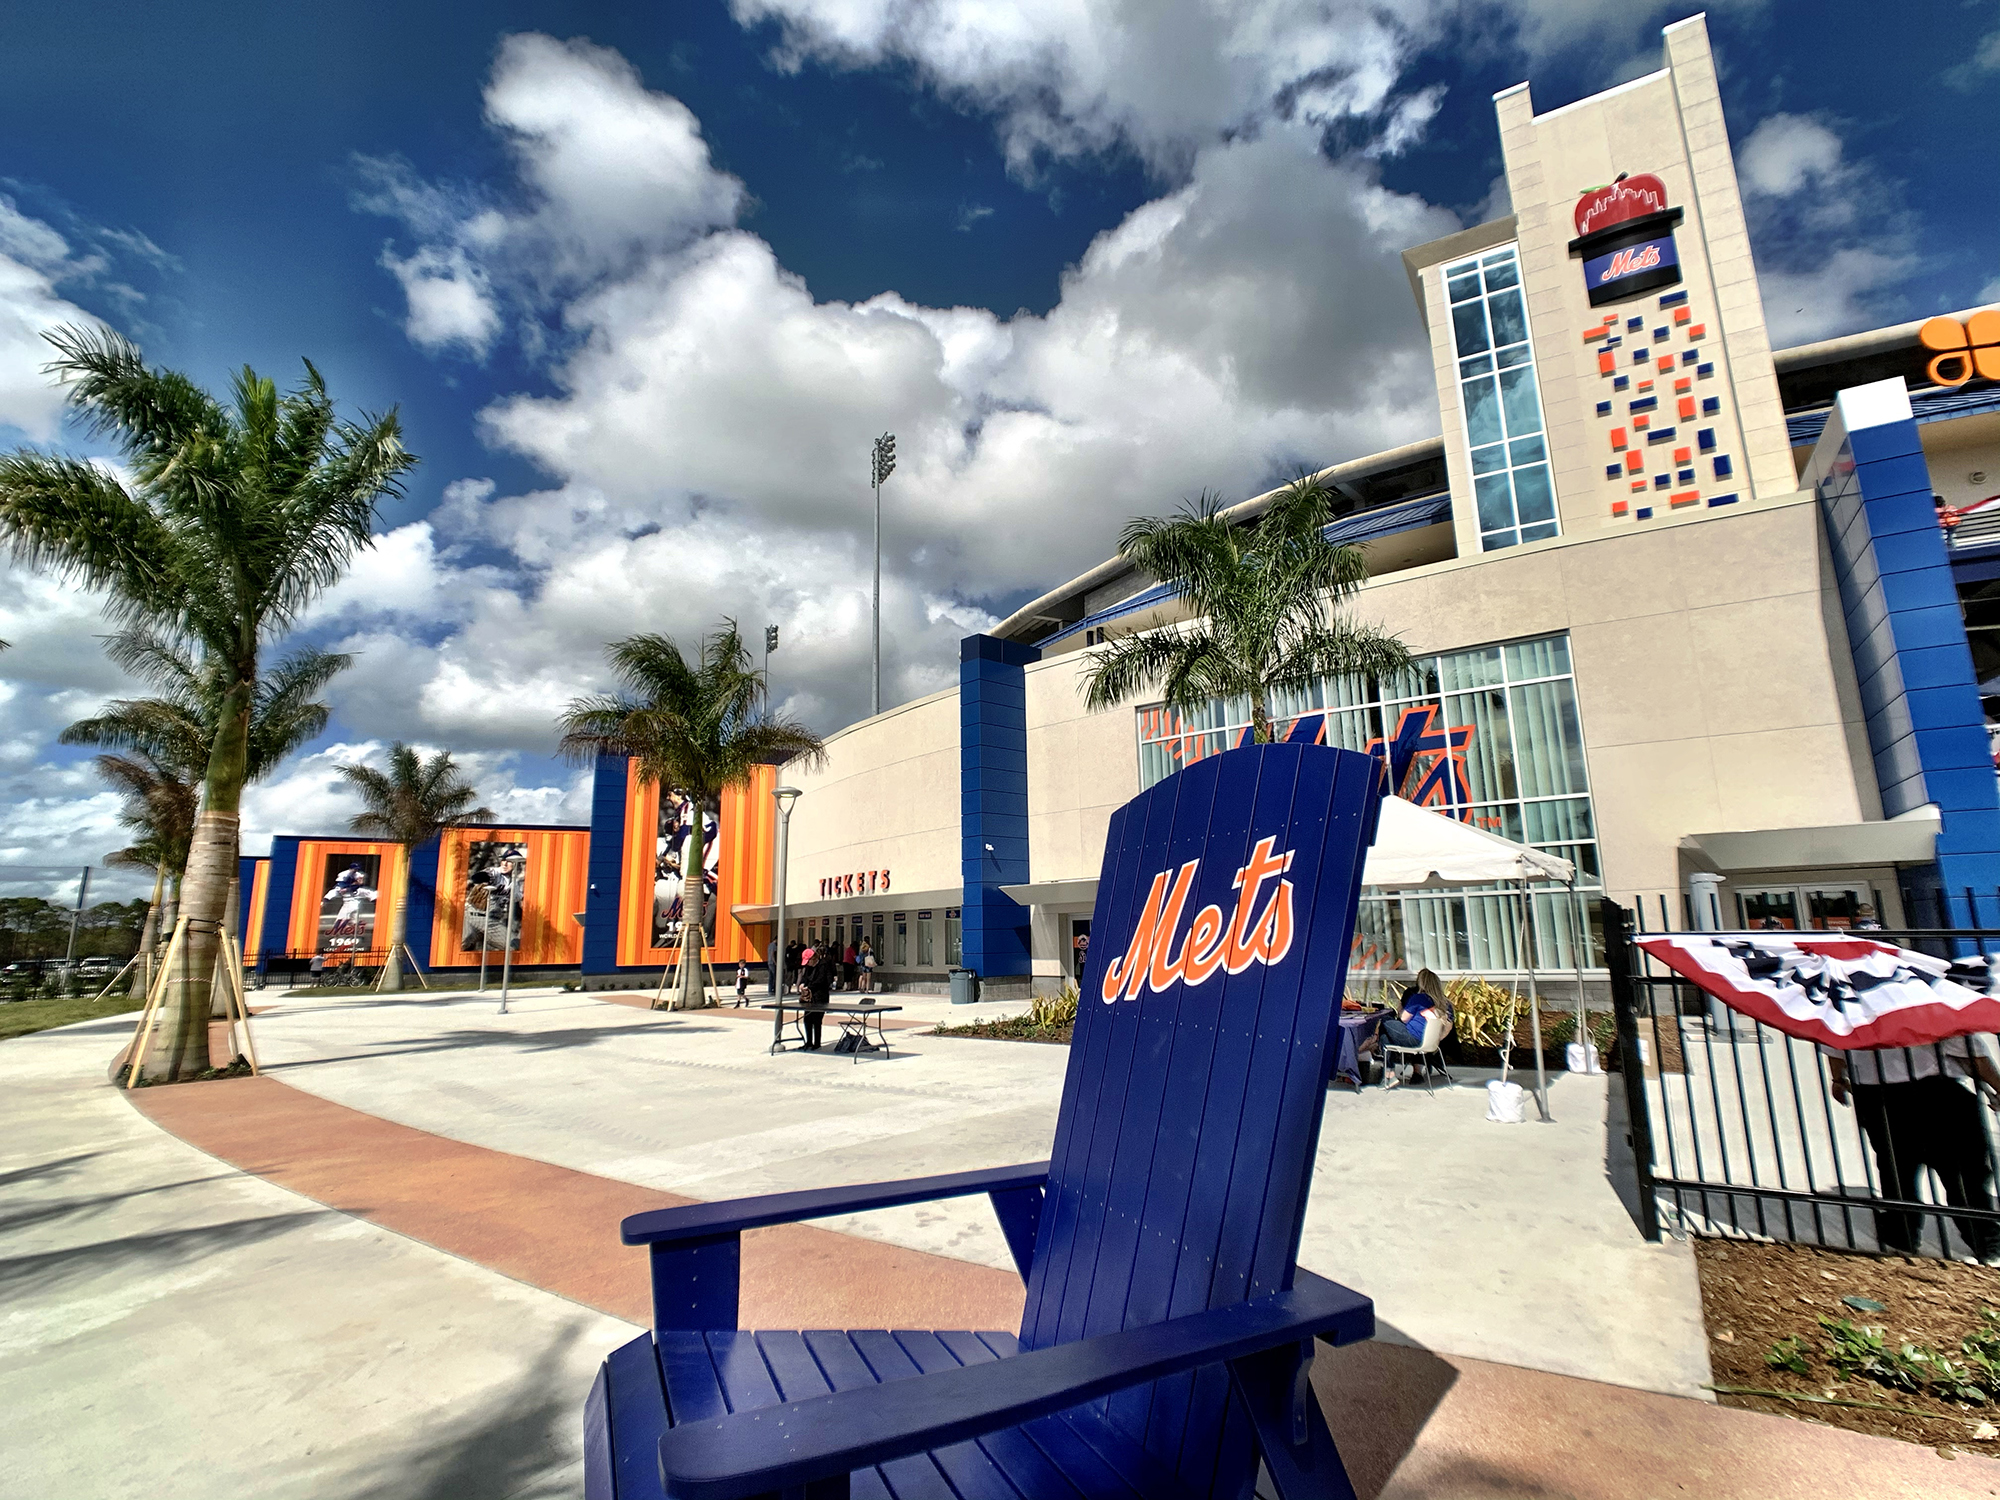 New York Mets to hold free game for fans in Port St. Lucie